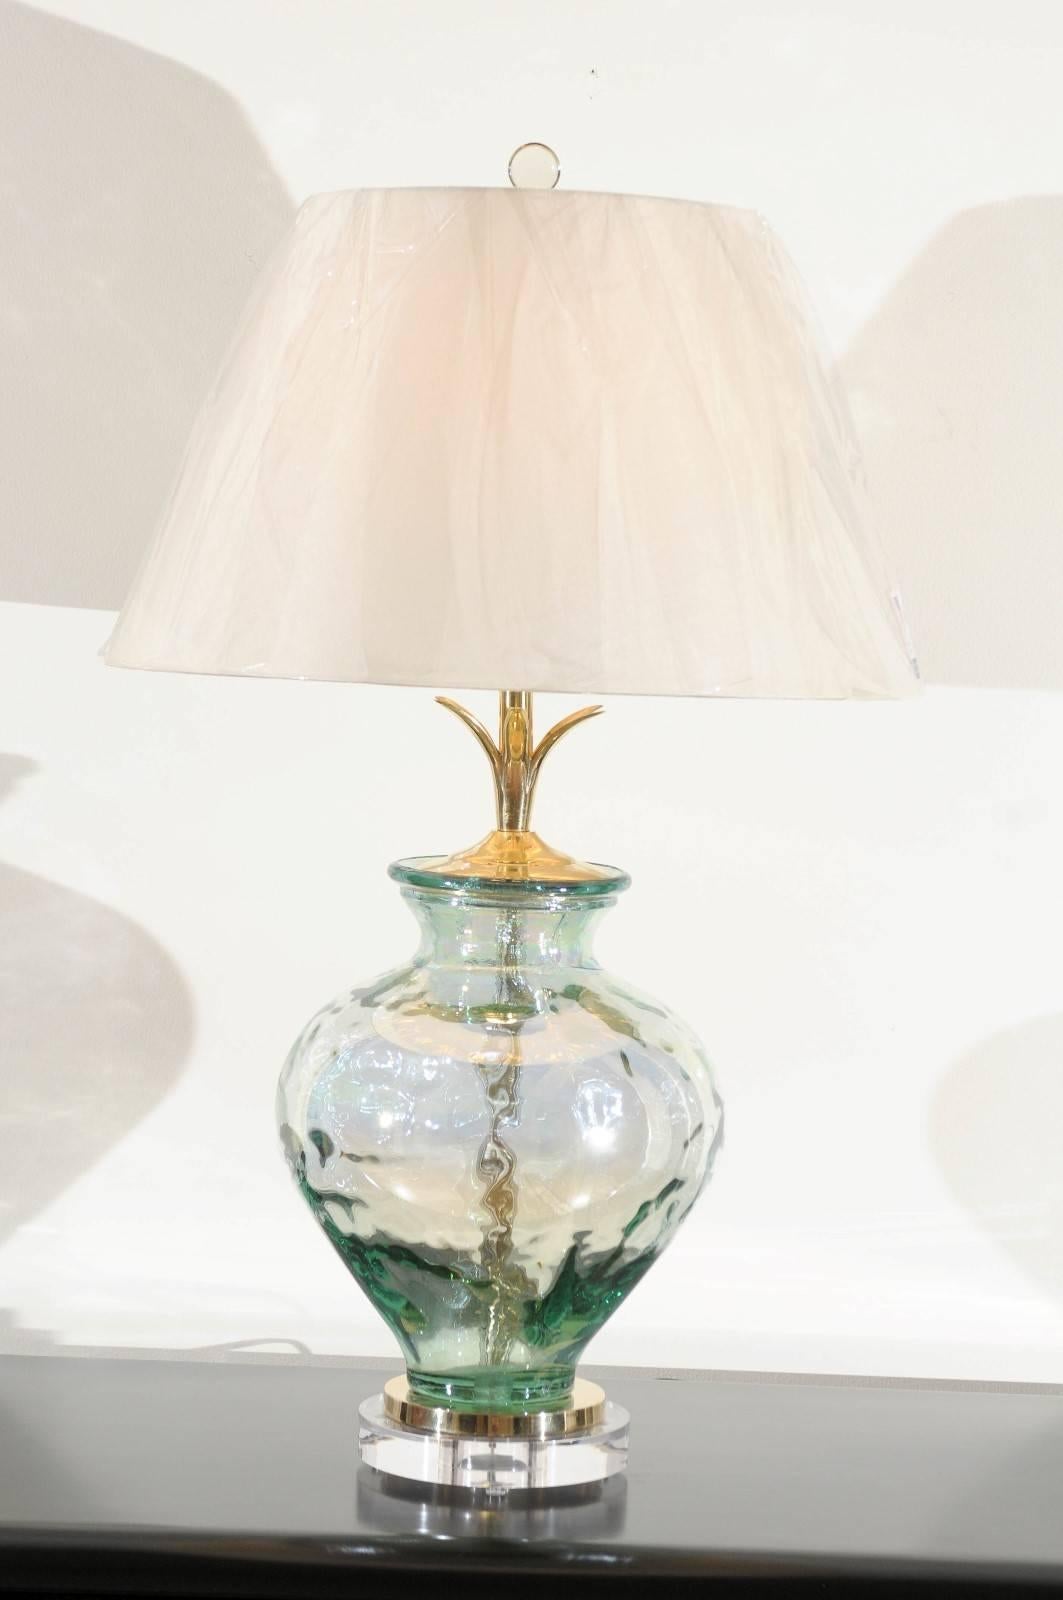 A lovely pair of heavy glass vases as custom lamps. Beautiful, thick blown glass form with a subtle reflective quality. Fabulous weight and craftsmanship. Exceptional jewelry! Excellent restored condition. Wired using clear cord; new three-way brass